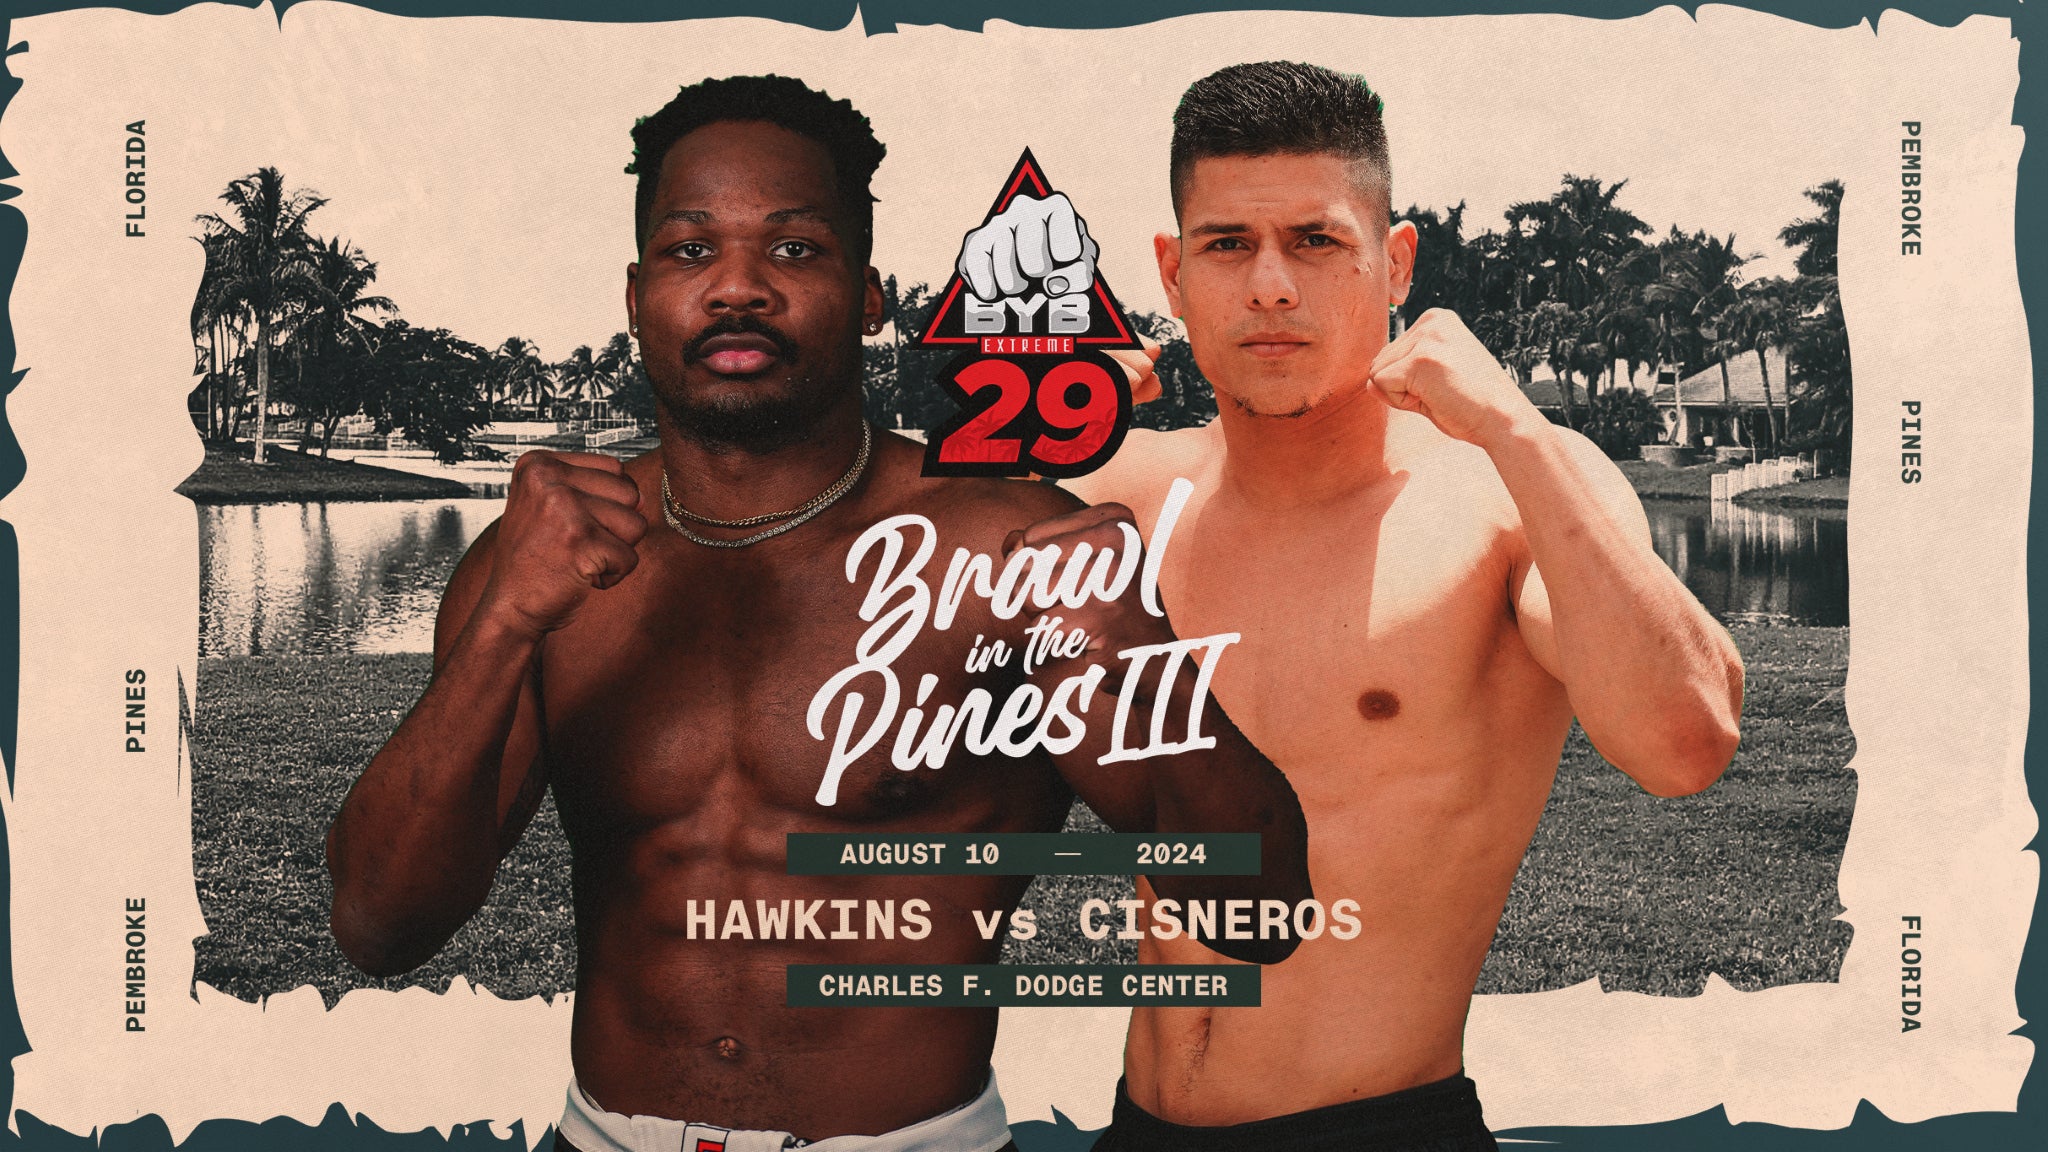 BYB 29: Brawl In The Pines III